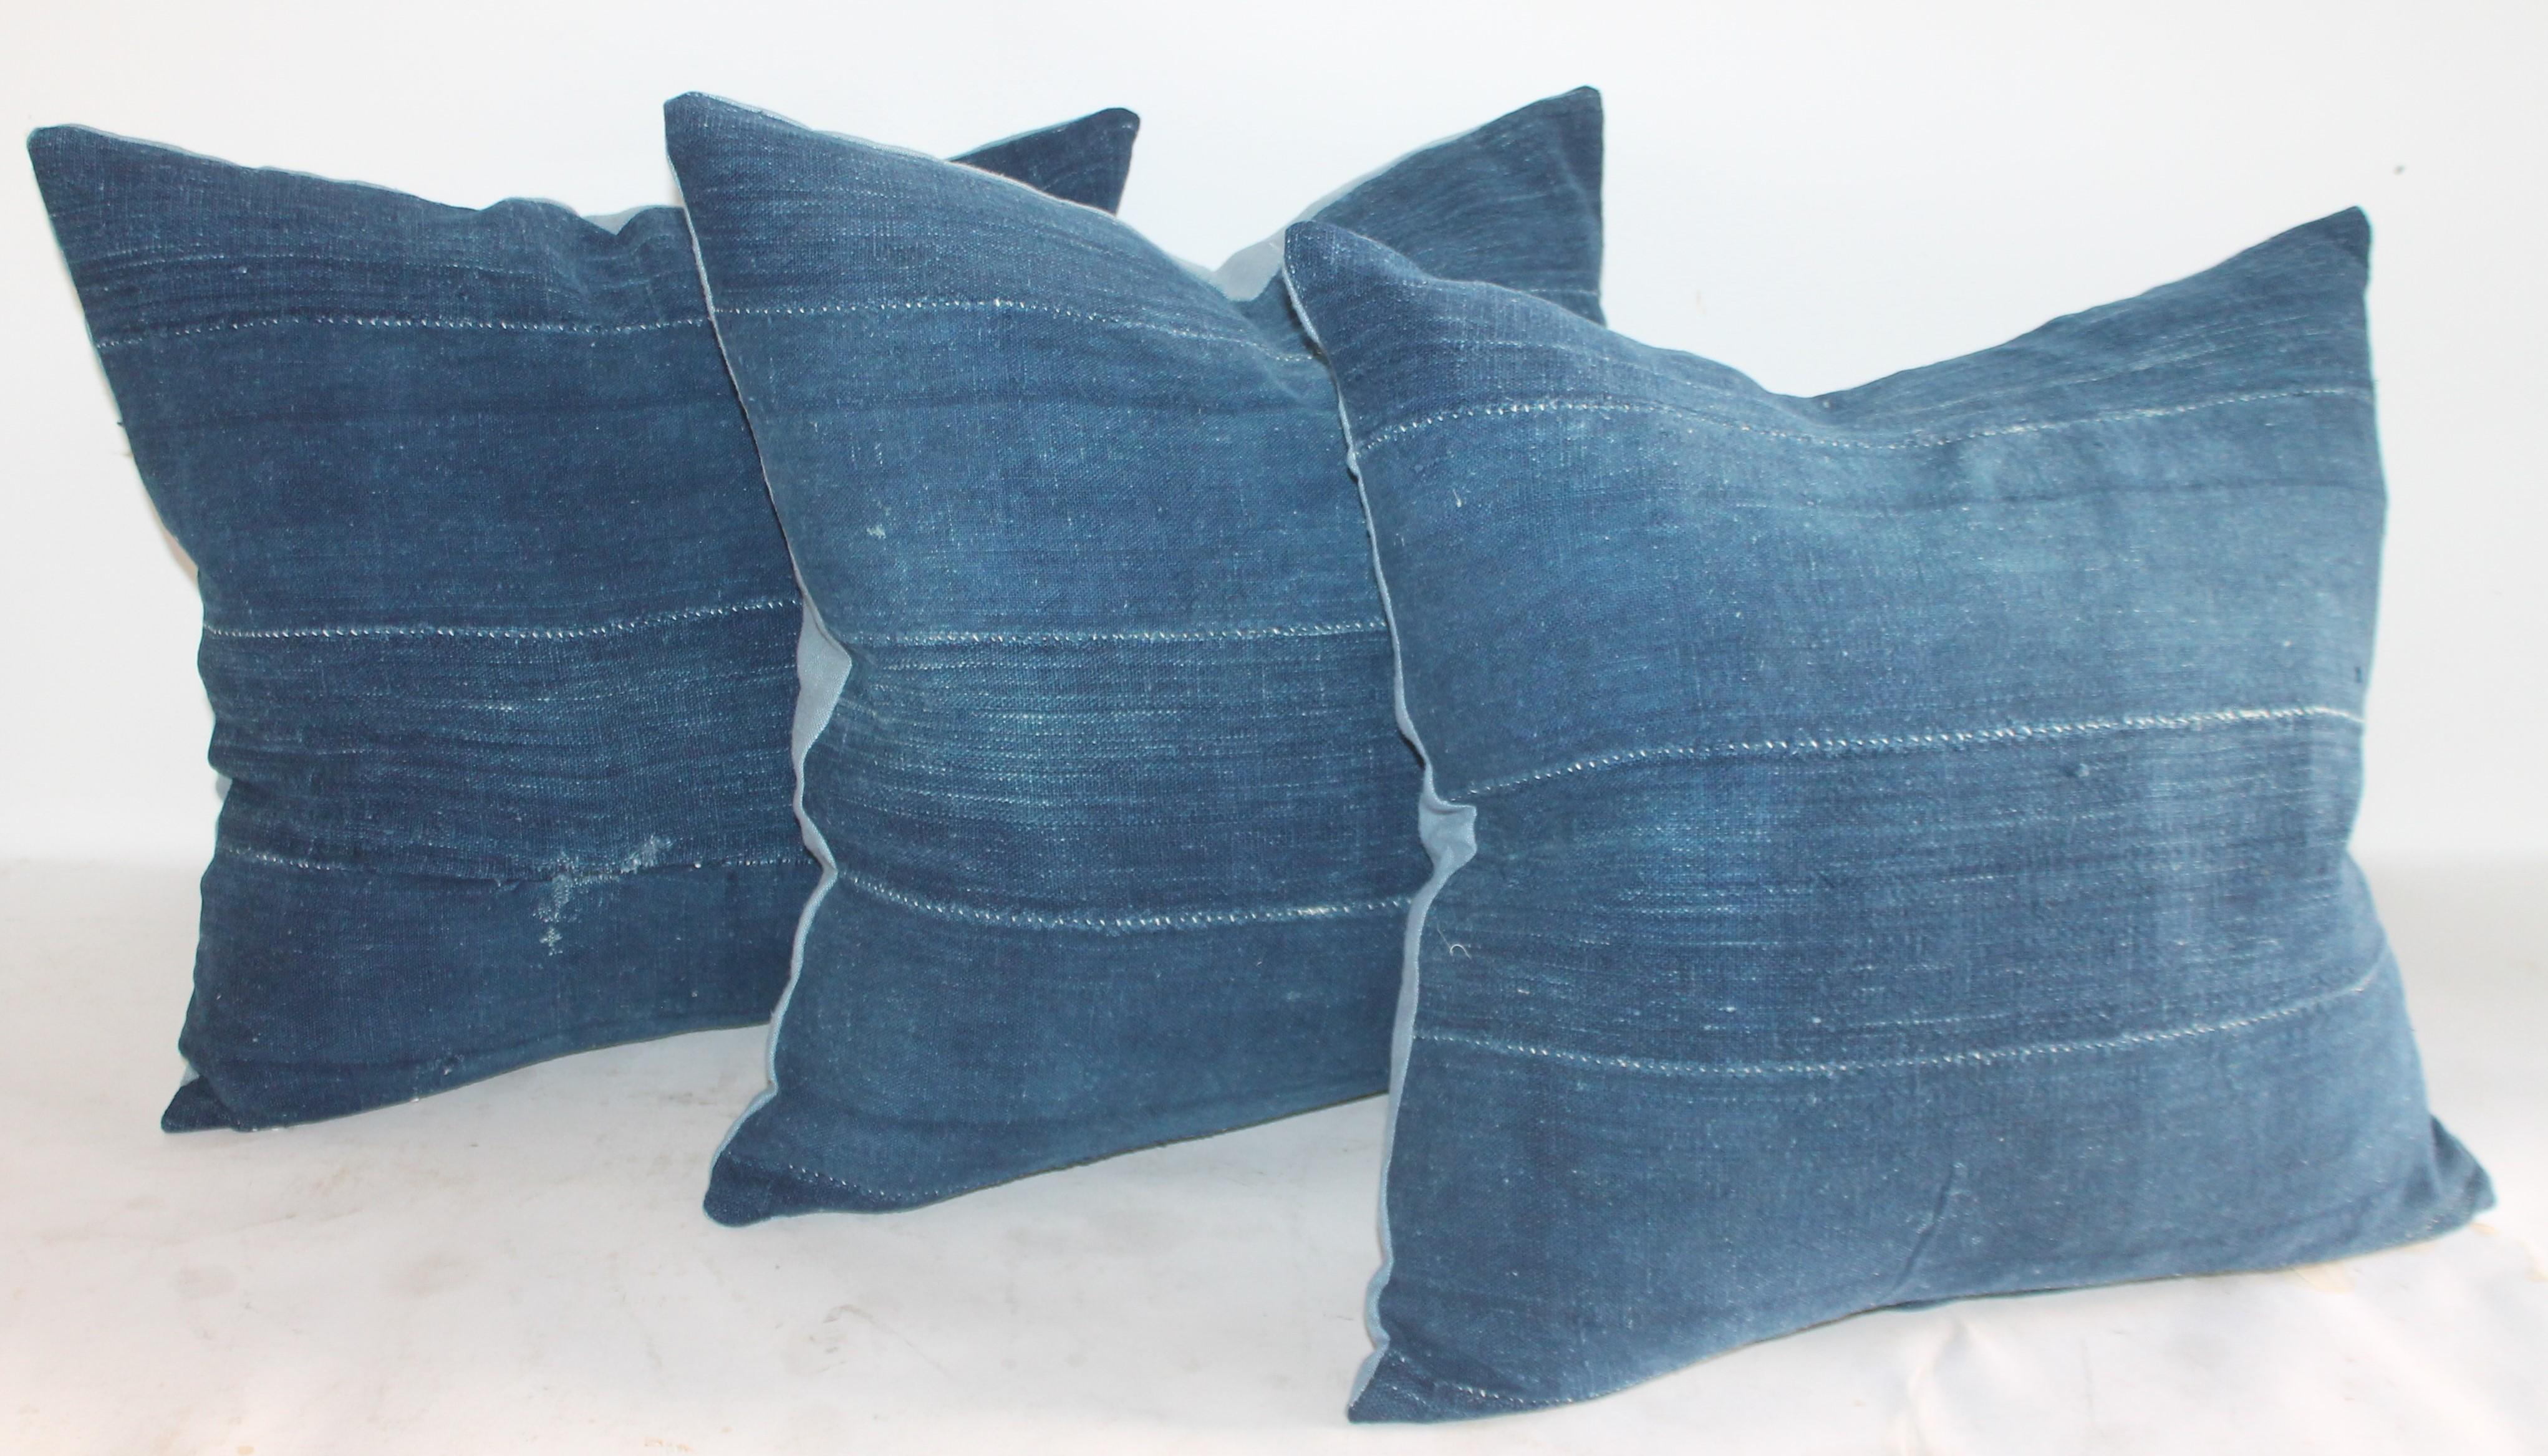 Collection of three indigo blue linen pillows with light blue linen backings. The inserts are down and feather fill.